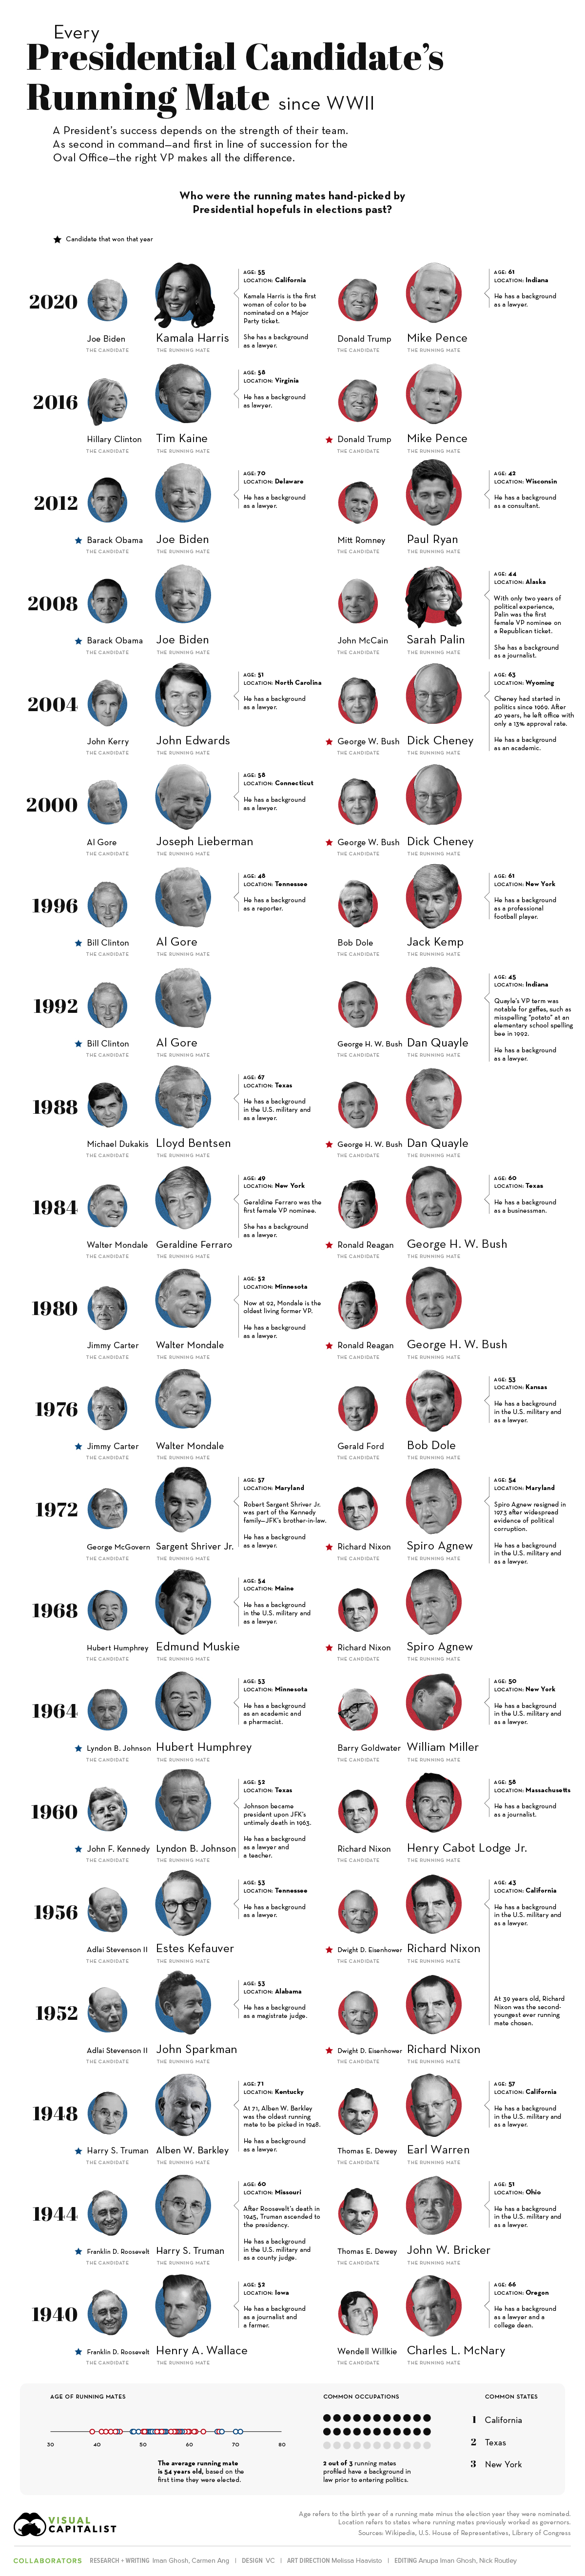 Every Presidential Candidate's Running Mate Since WWII